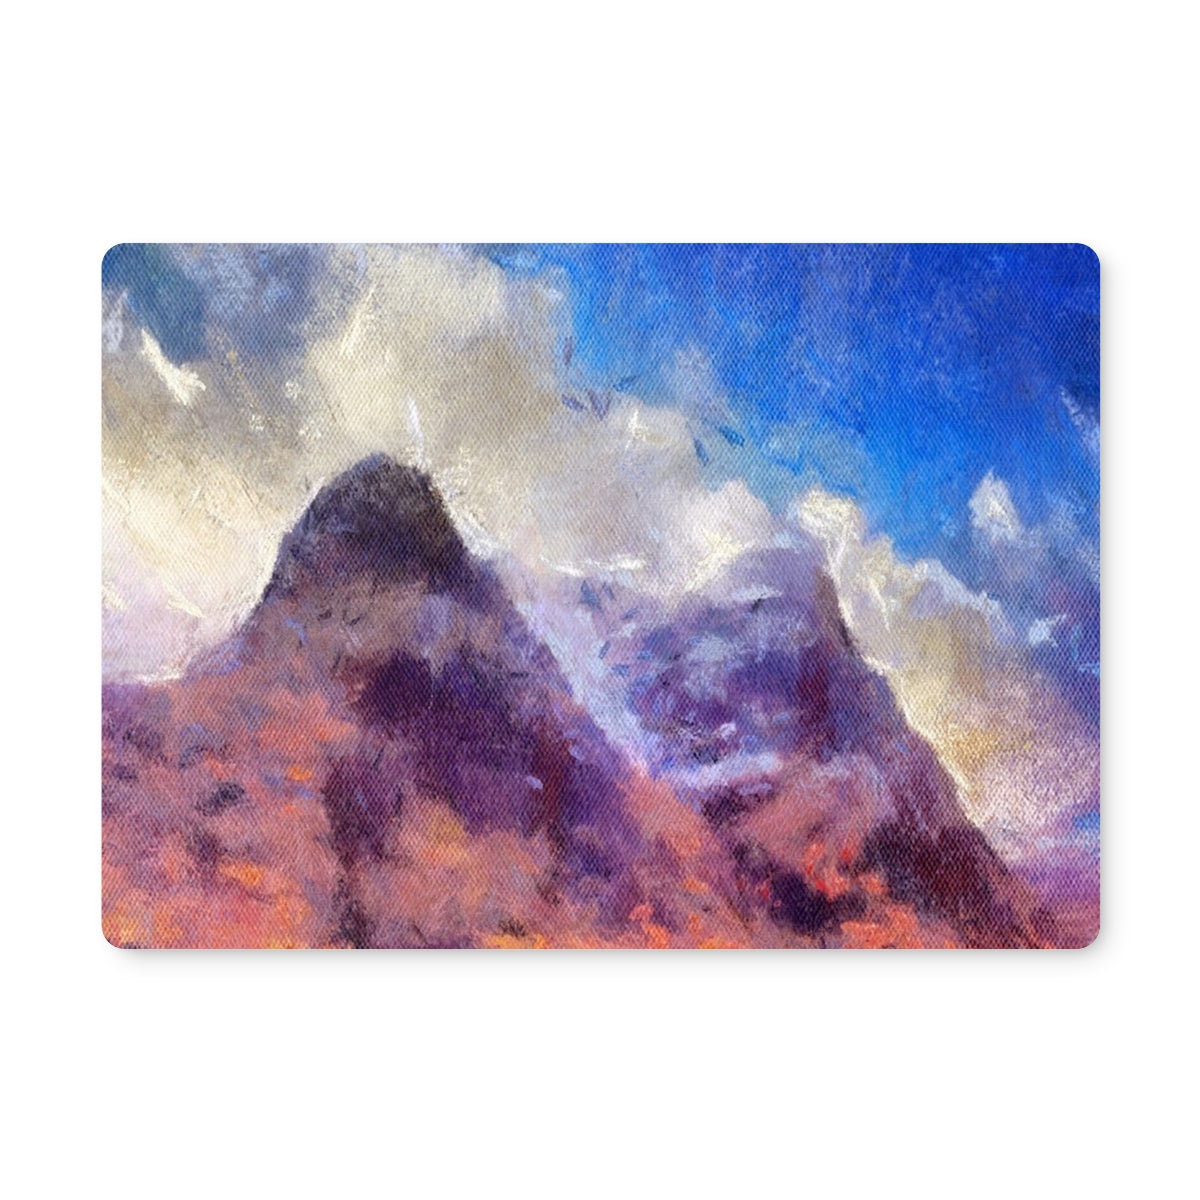 Glencoe Art Gifts Placemat-Placemats-Glencoe Art Gallery-Single Placemat-Paintings, Prints, Homeware, Art Gifts From Scotland By Scottish Artist Kevin Hunter